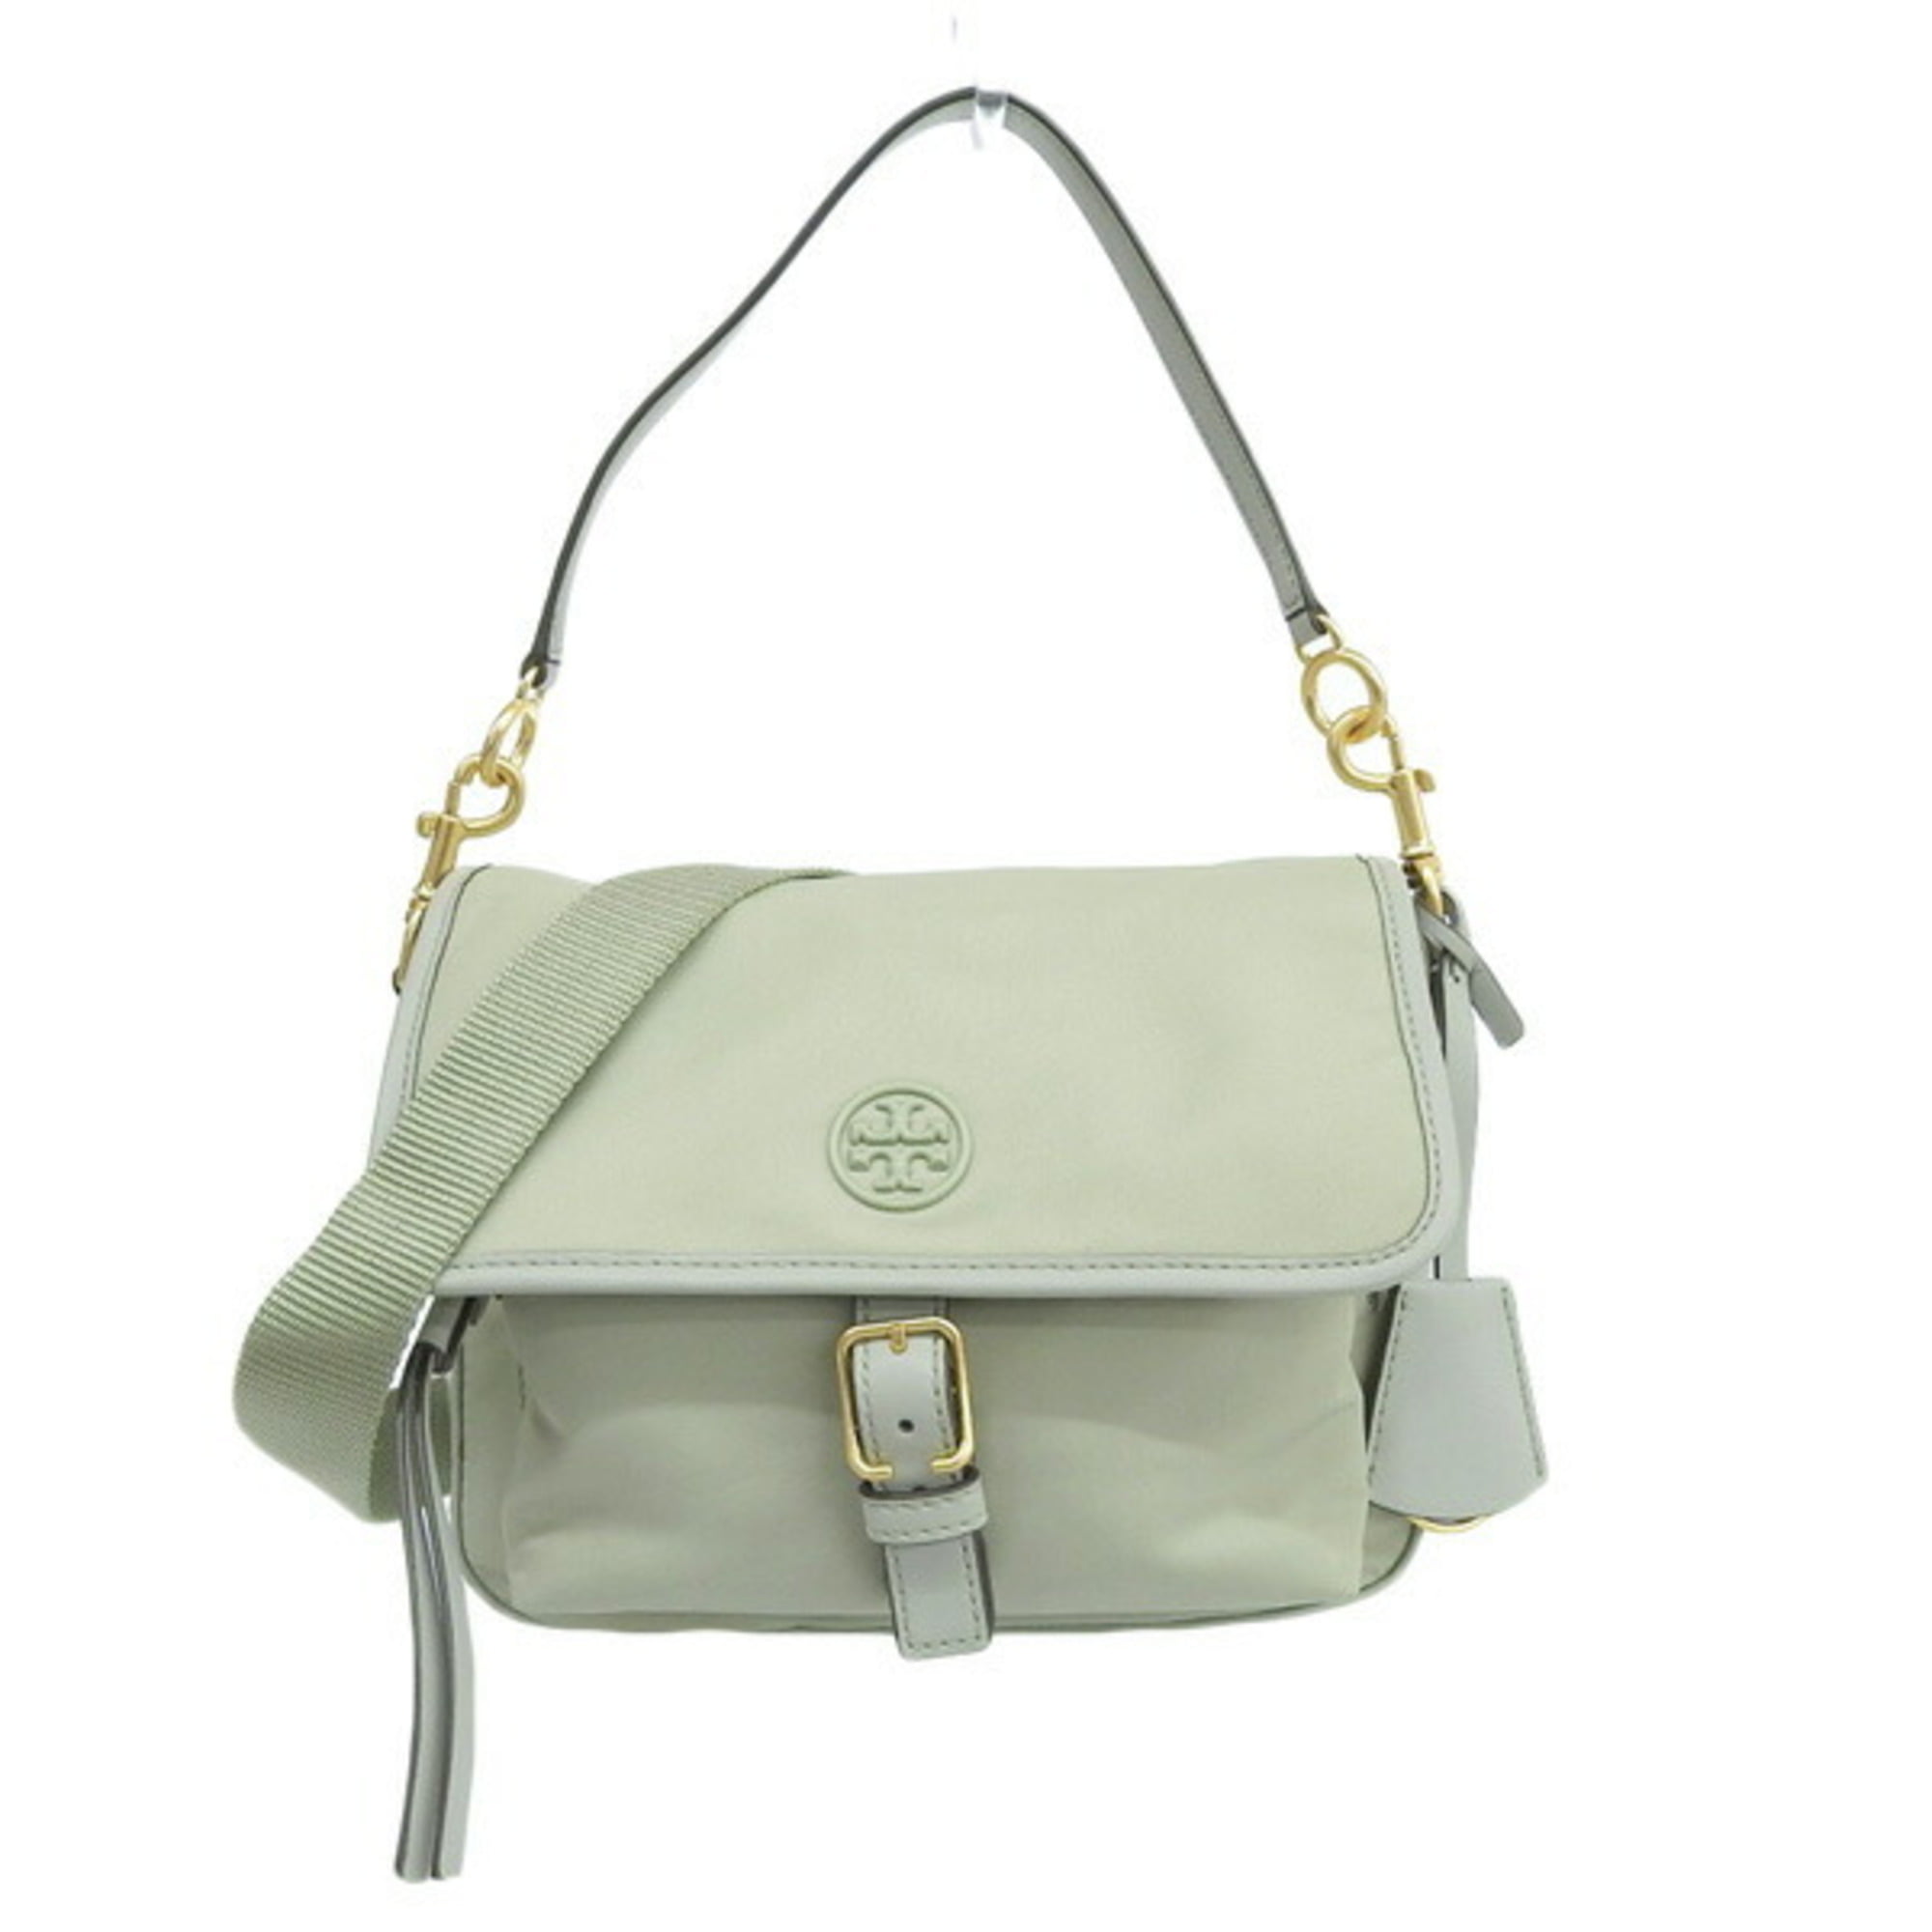 Authenticated Used TORY BURCH Tory Burch Nylon Walker Emboss Small Shoulder Bag  Green 